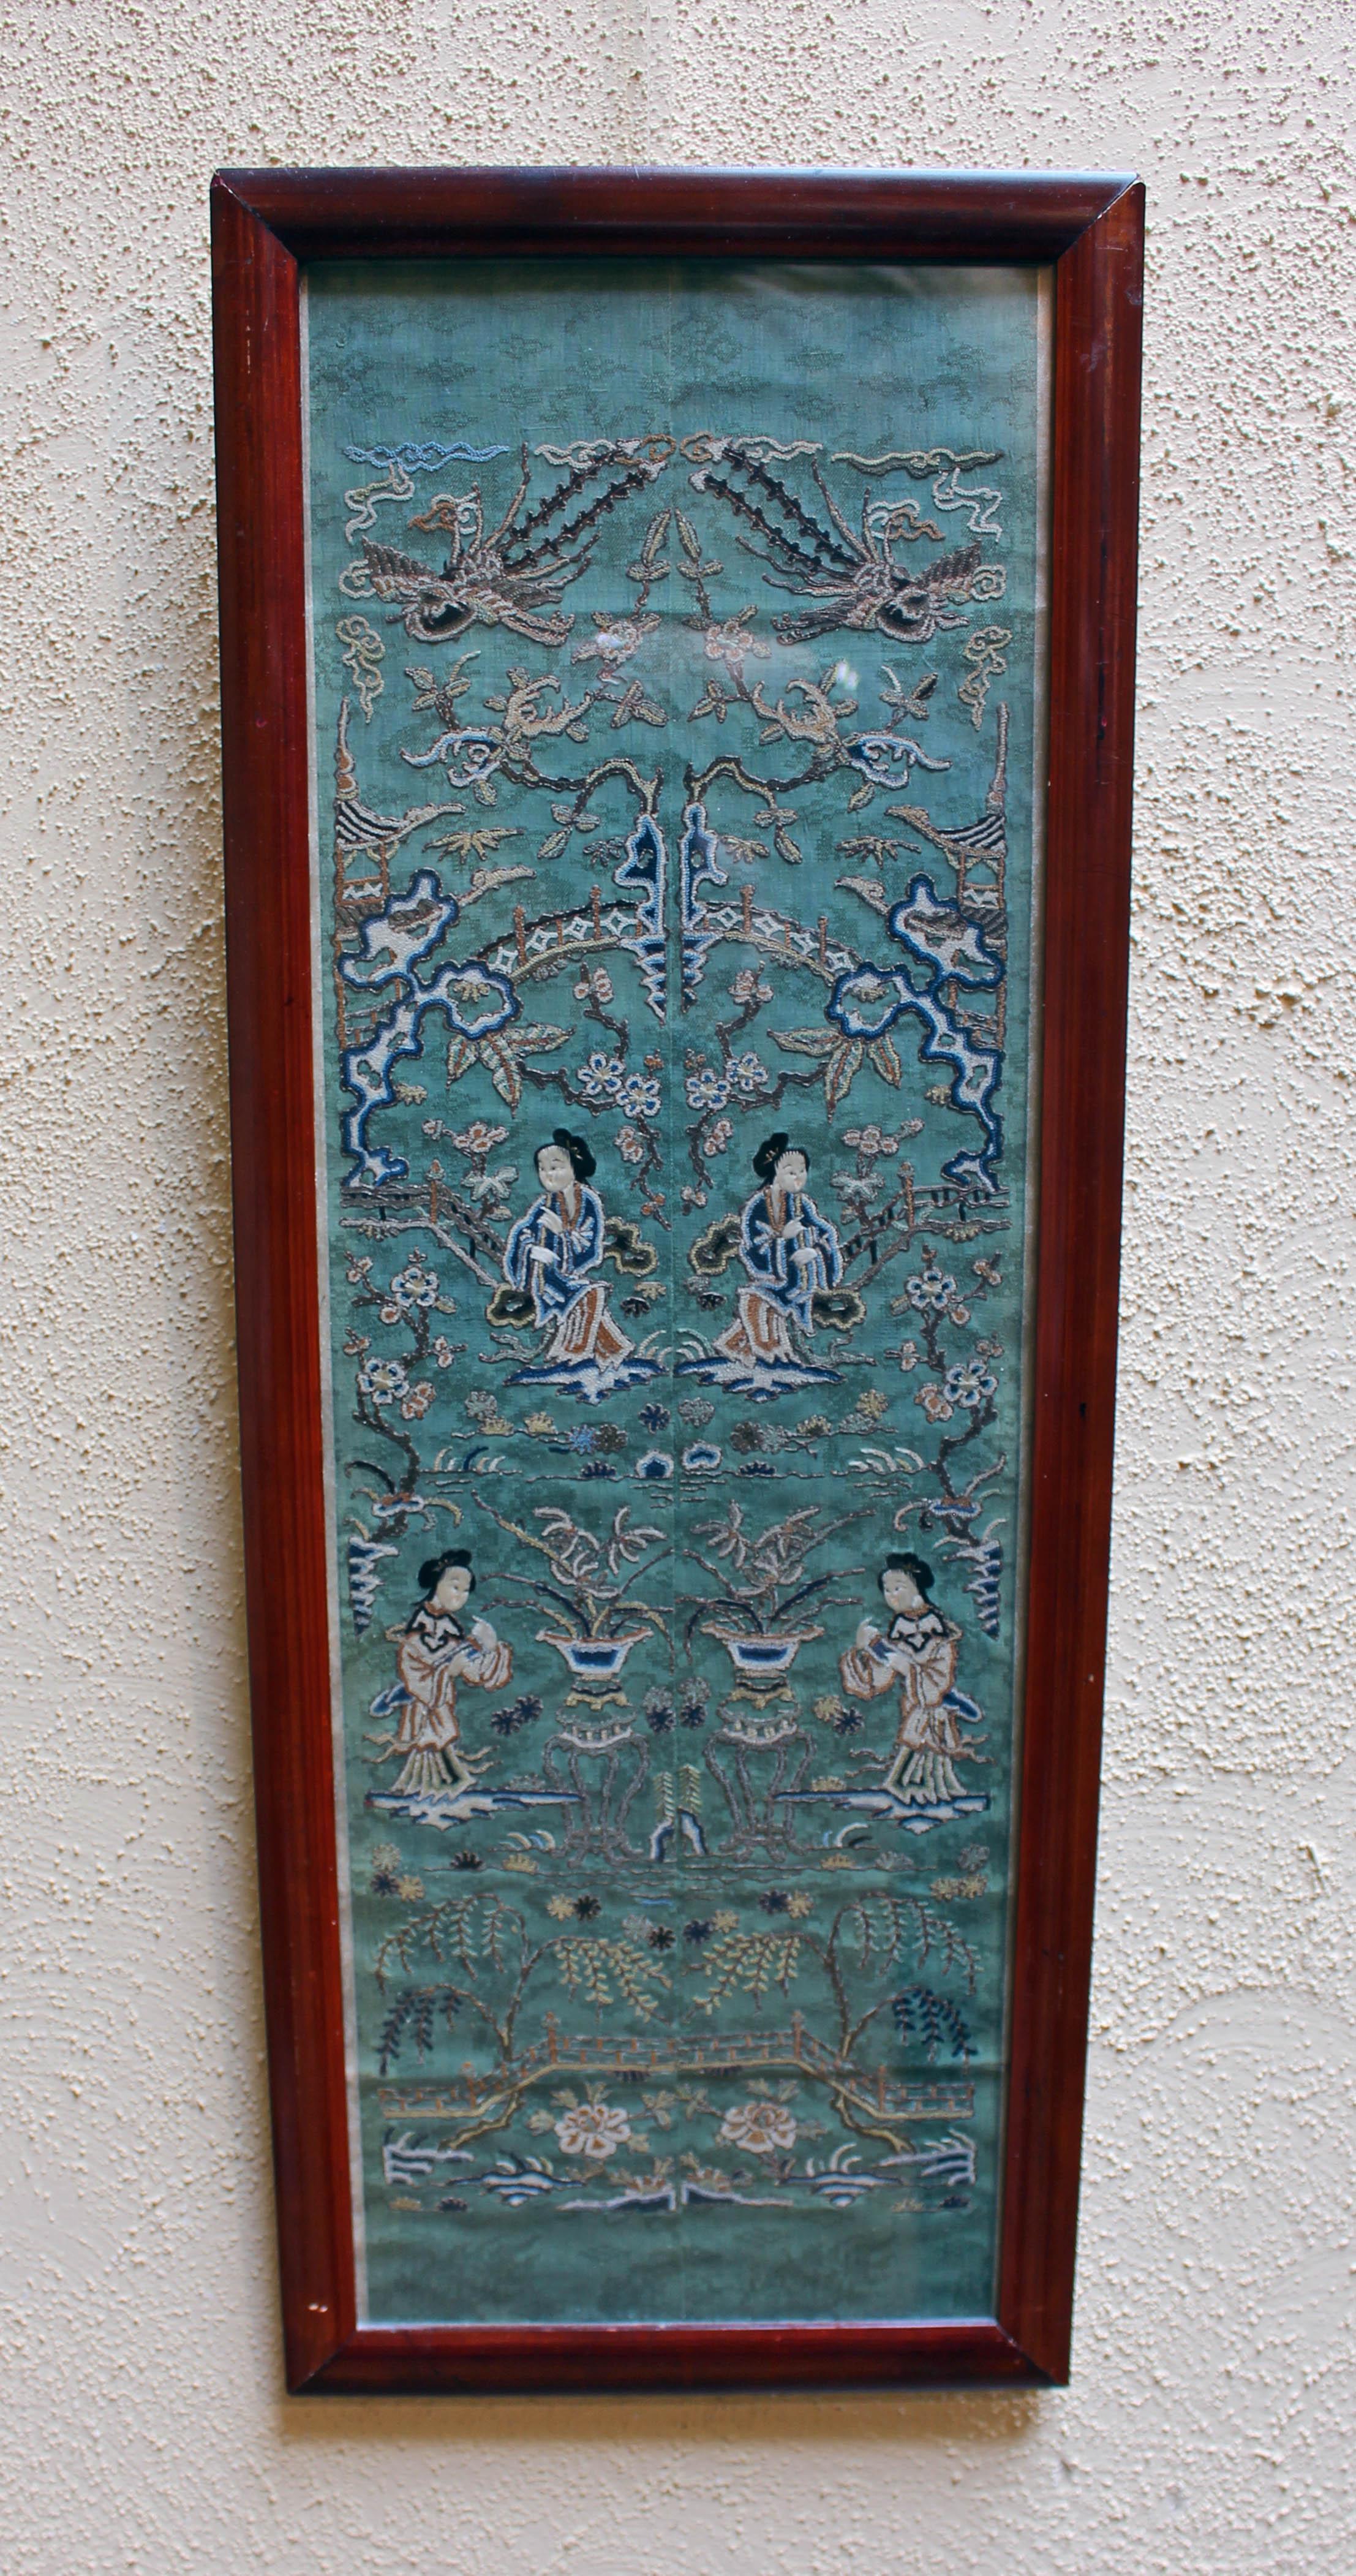 An exquisitely rendered sleeve panel, now framed, of silk embroidery on woven patterned green silk, displaying gold and silver threads, chain stitching and flat stitching. Phoenix birds soar over tea houses above garden and bridges. Late 19th